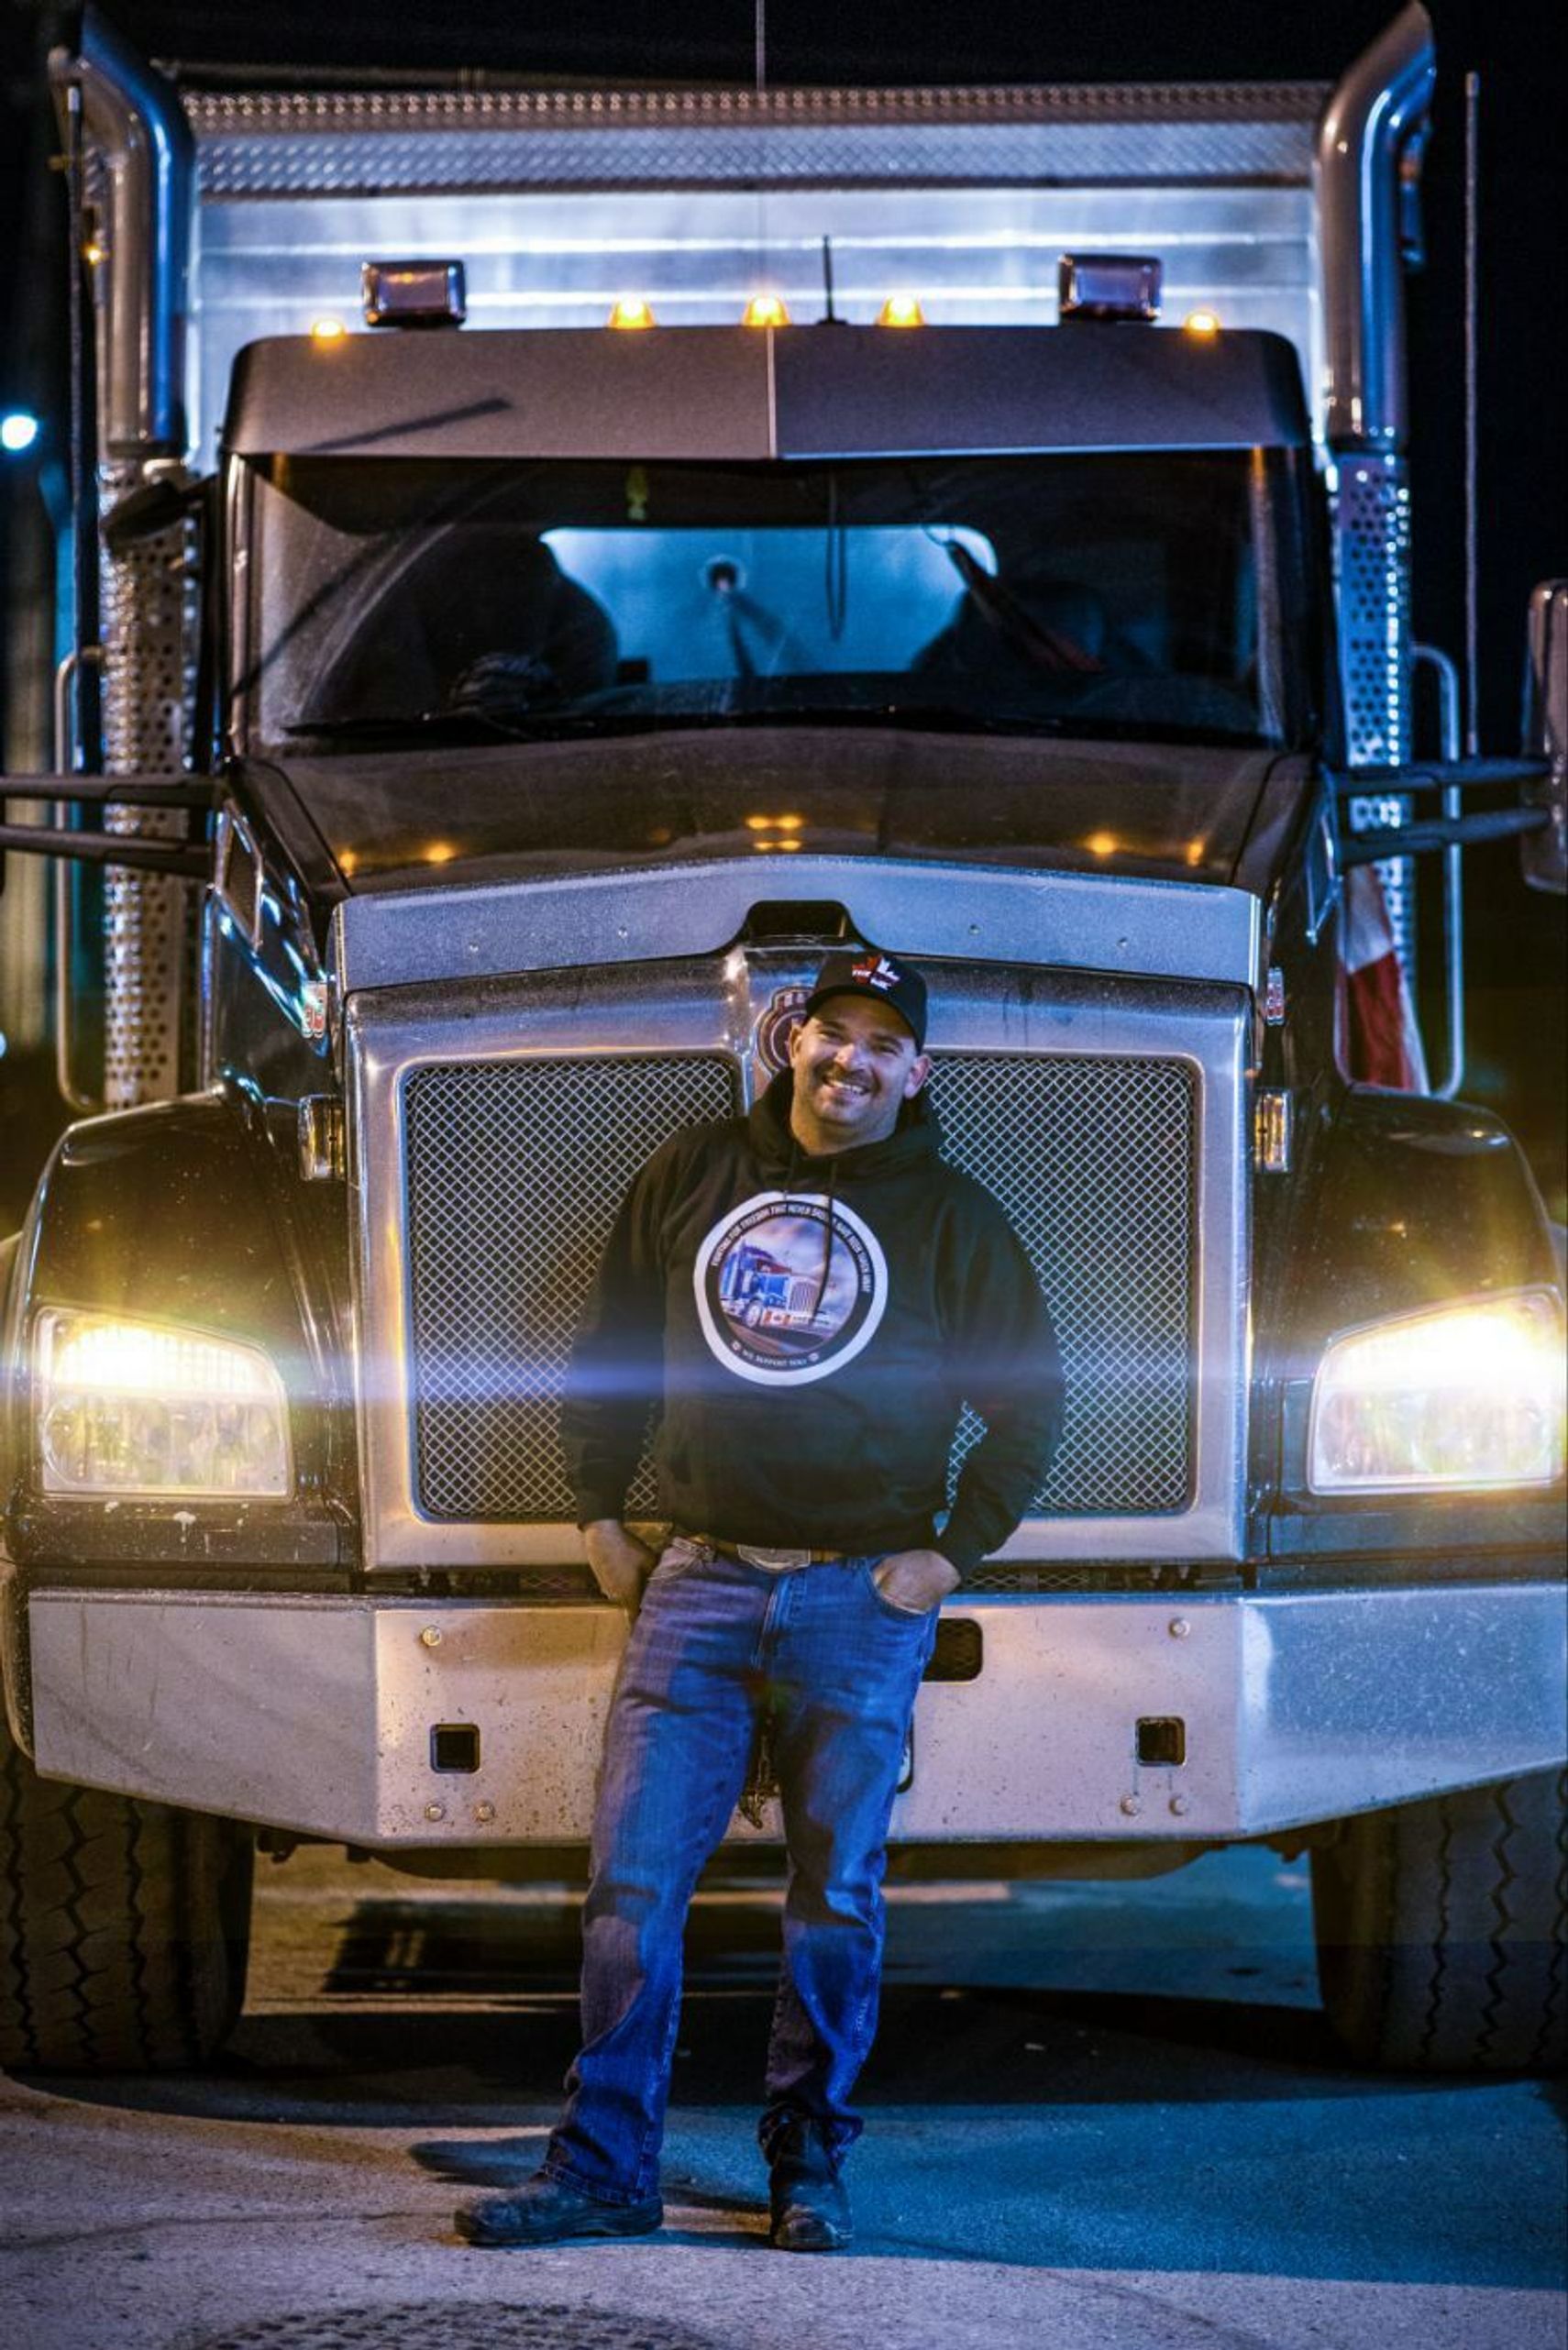 Image of Ken Wales standing in front of his semi truck.